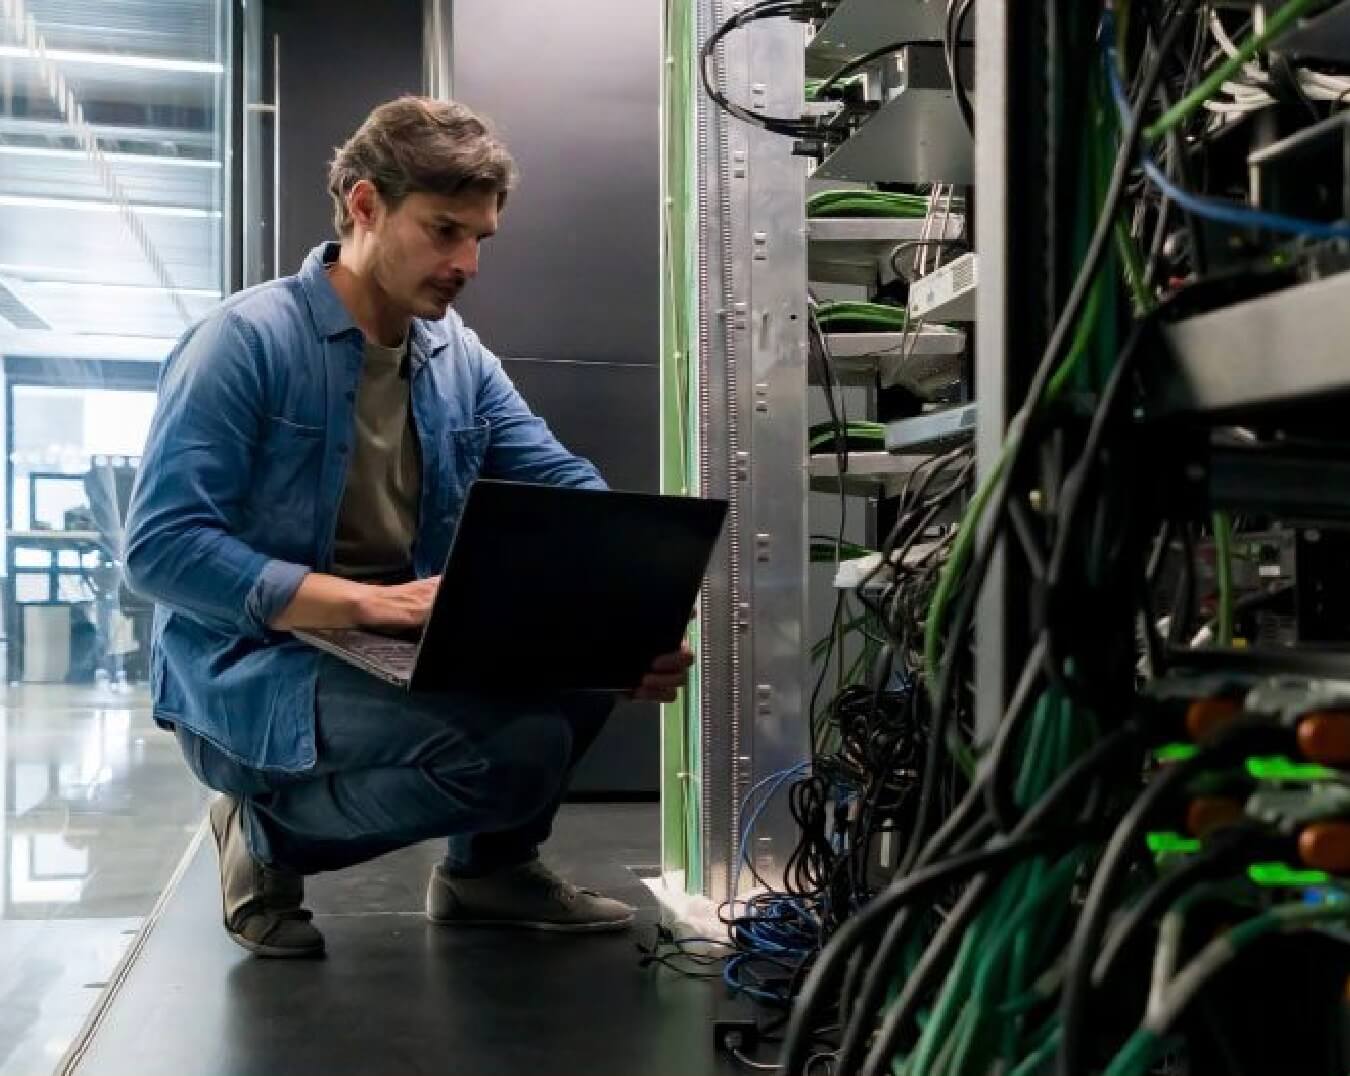 On-site analysis of a server rack